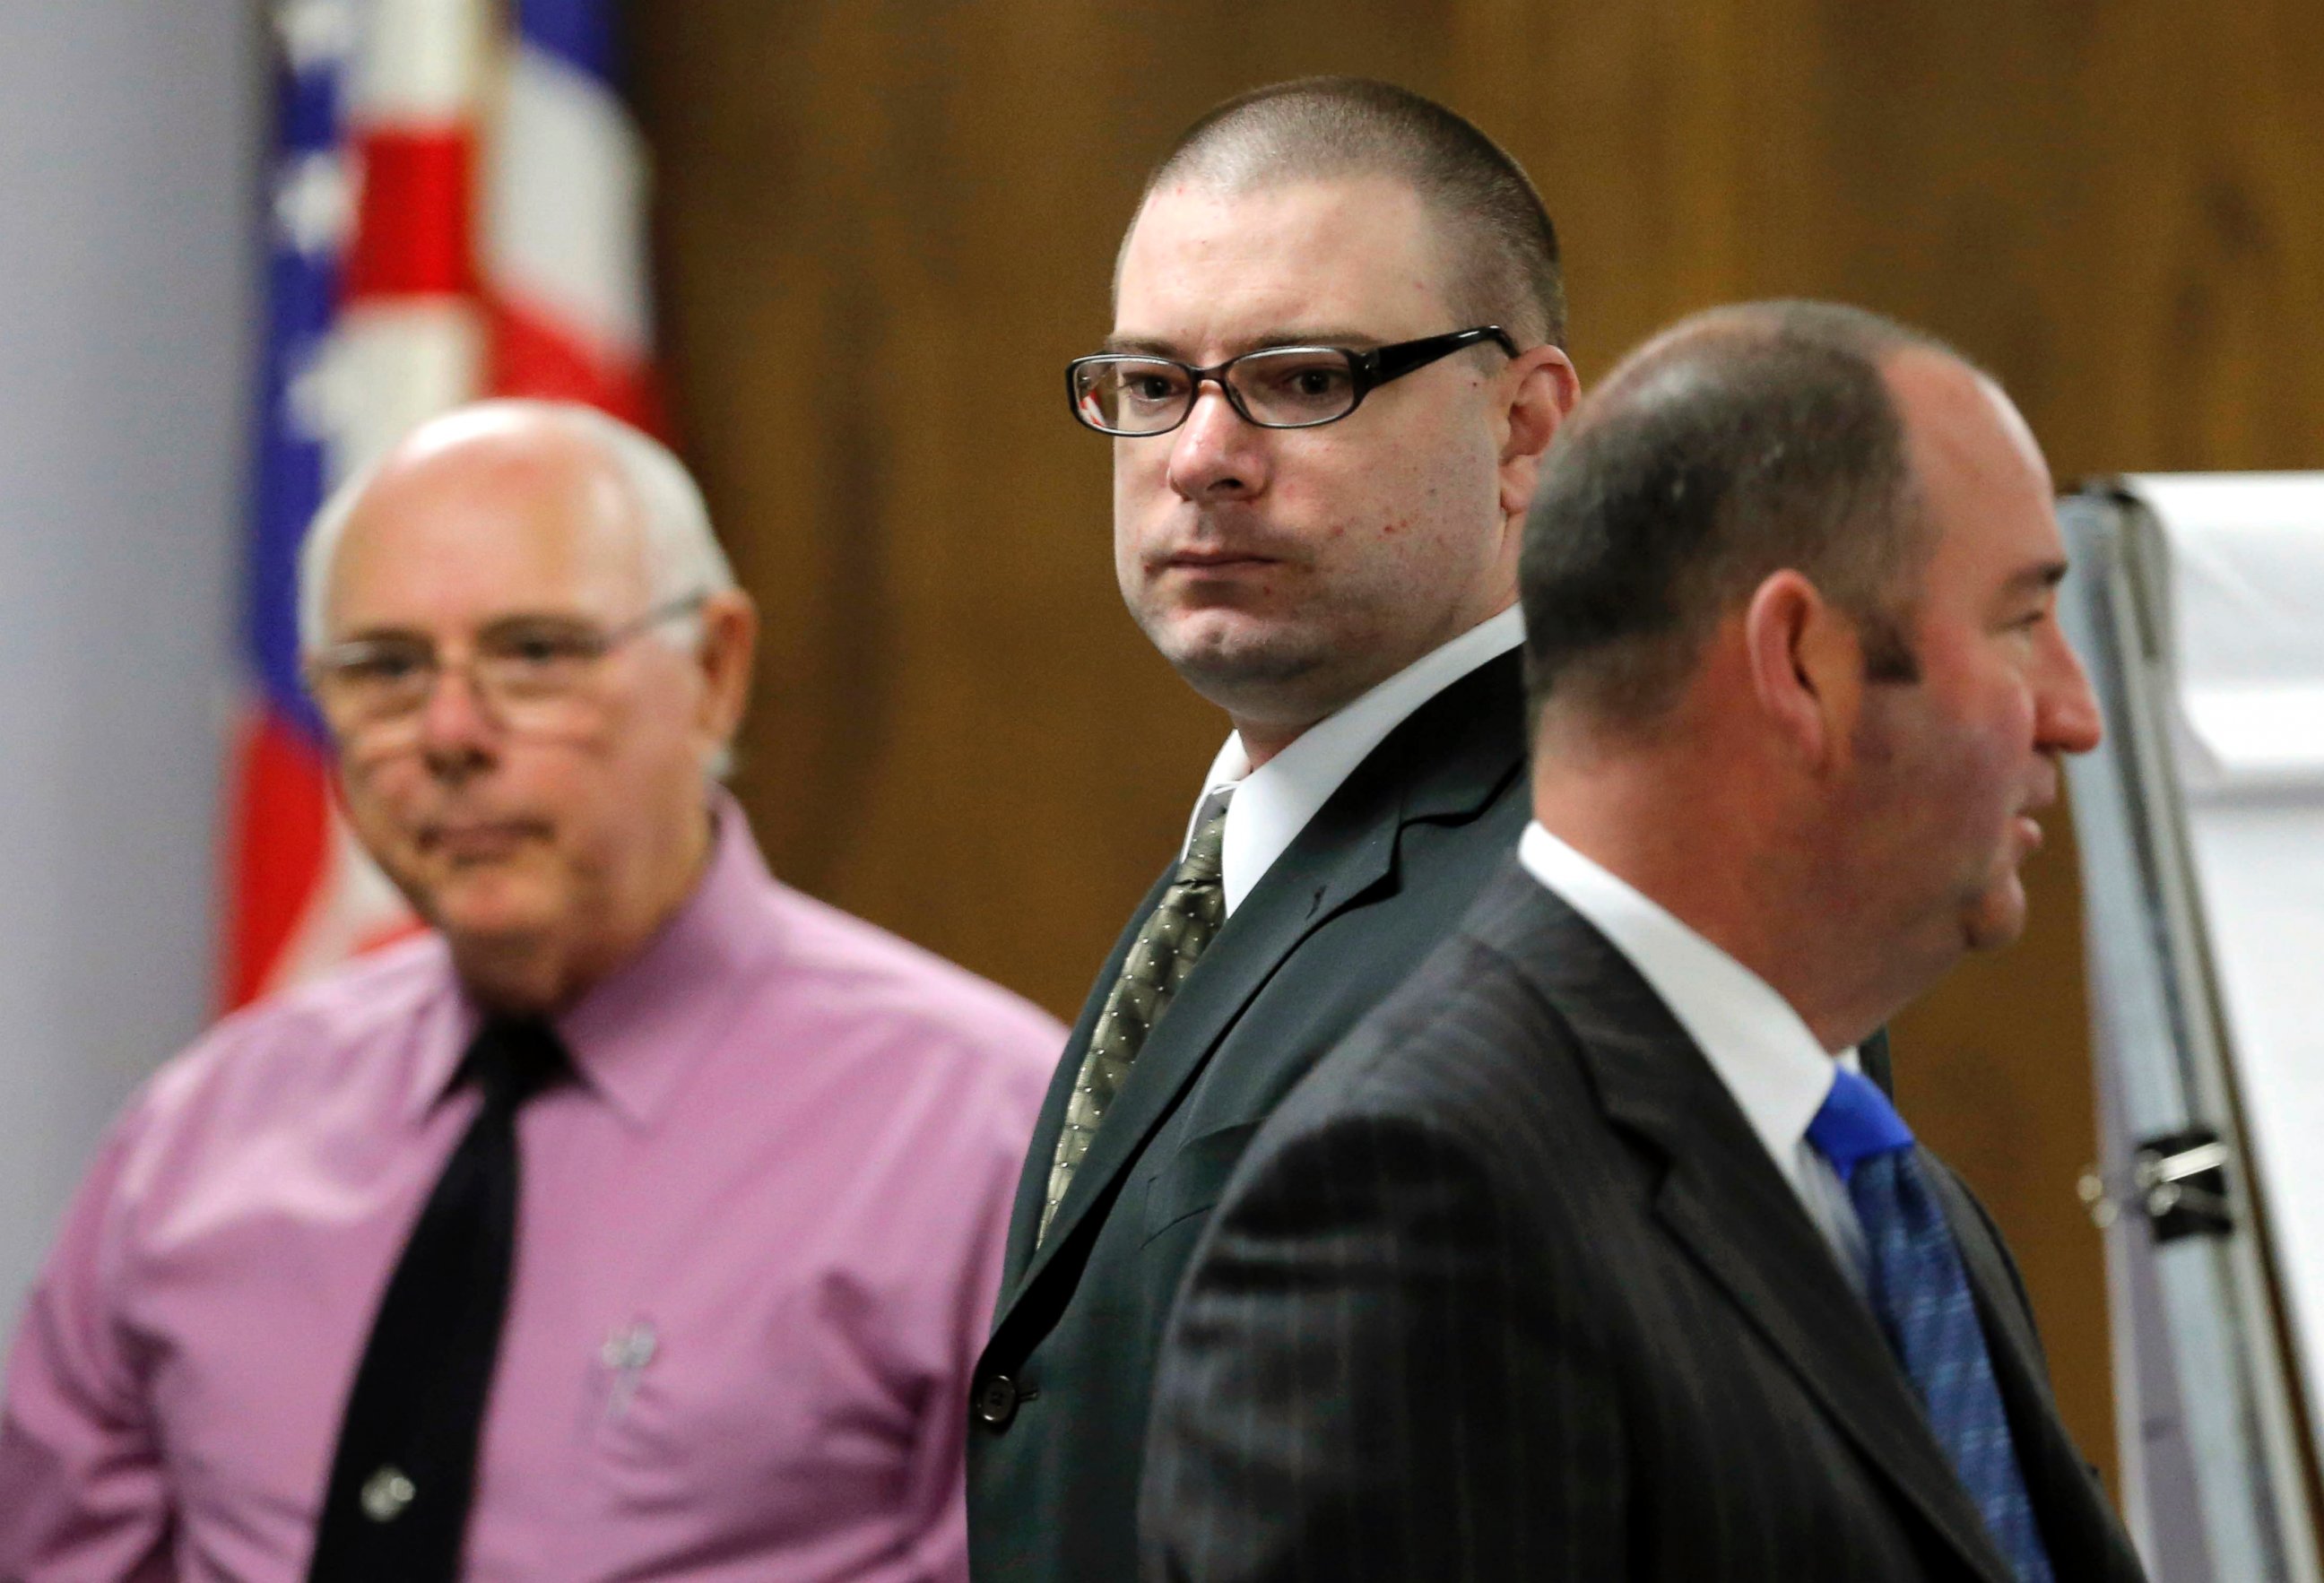 PHOTO: Eddie Ray Routh, center, enters the courtroom, Feb. 16, 2015, in Stephenville, Texas, as proceedings resume in the former Marine's trial.